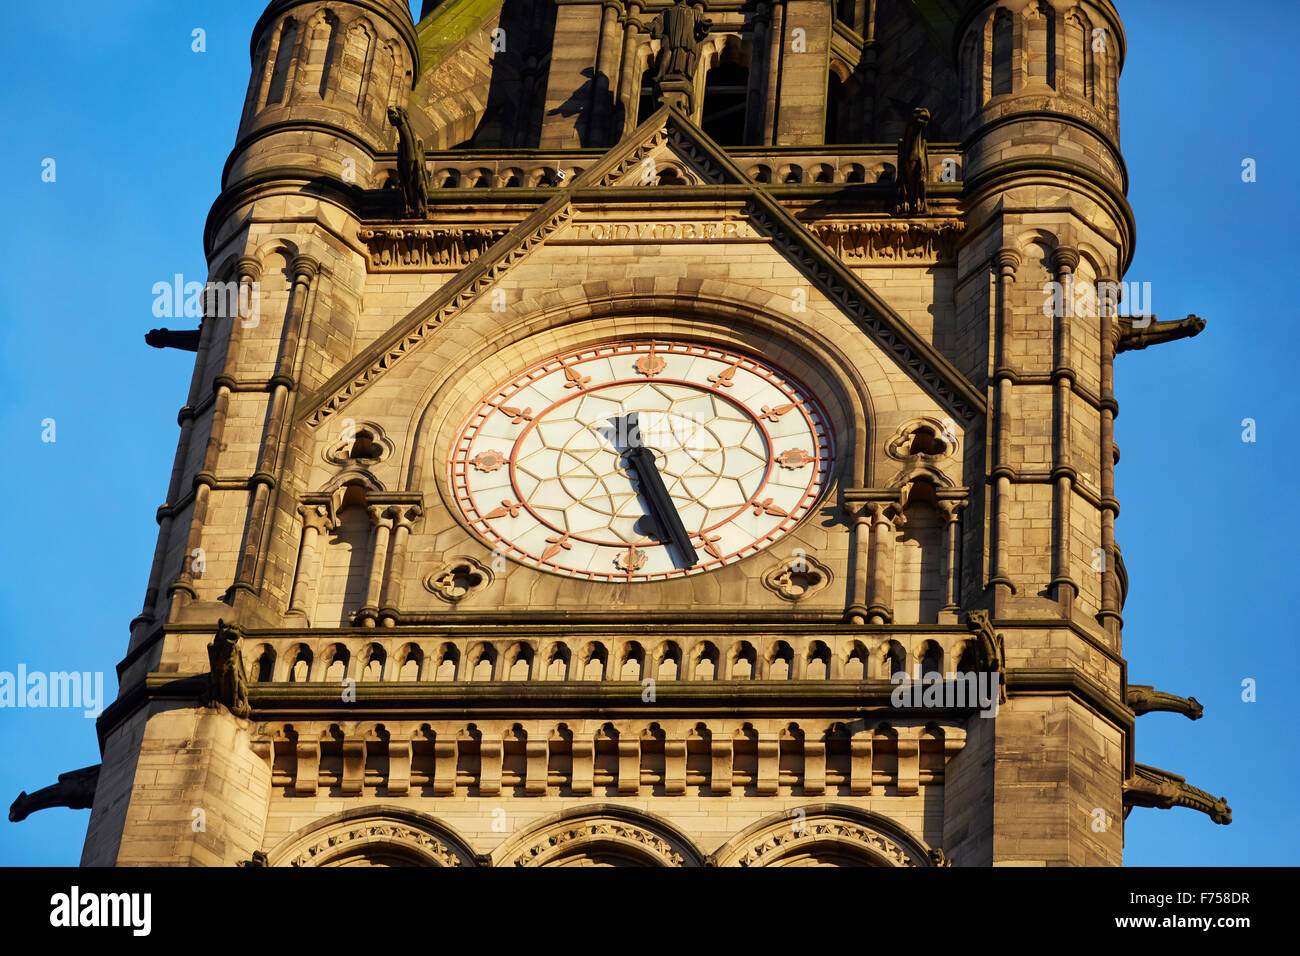 Manchester Town Hall clock tower clock face detail  Manchester Town Hall is a Victorian, Neo-gothic municipal building in Manche Stock Photo